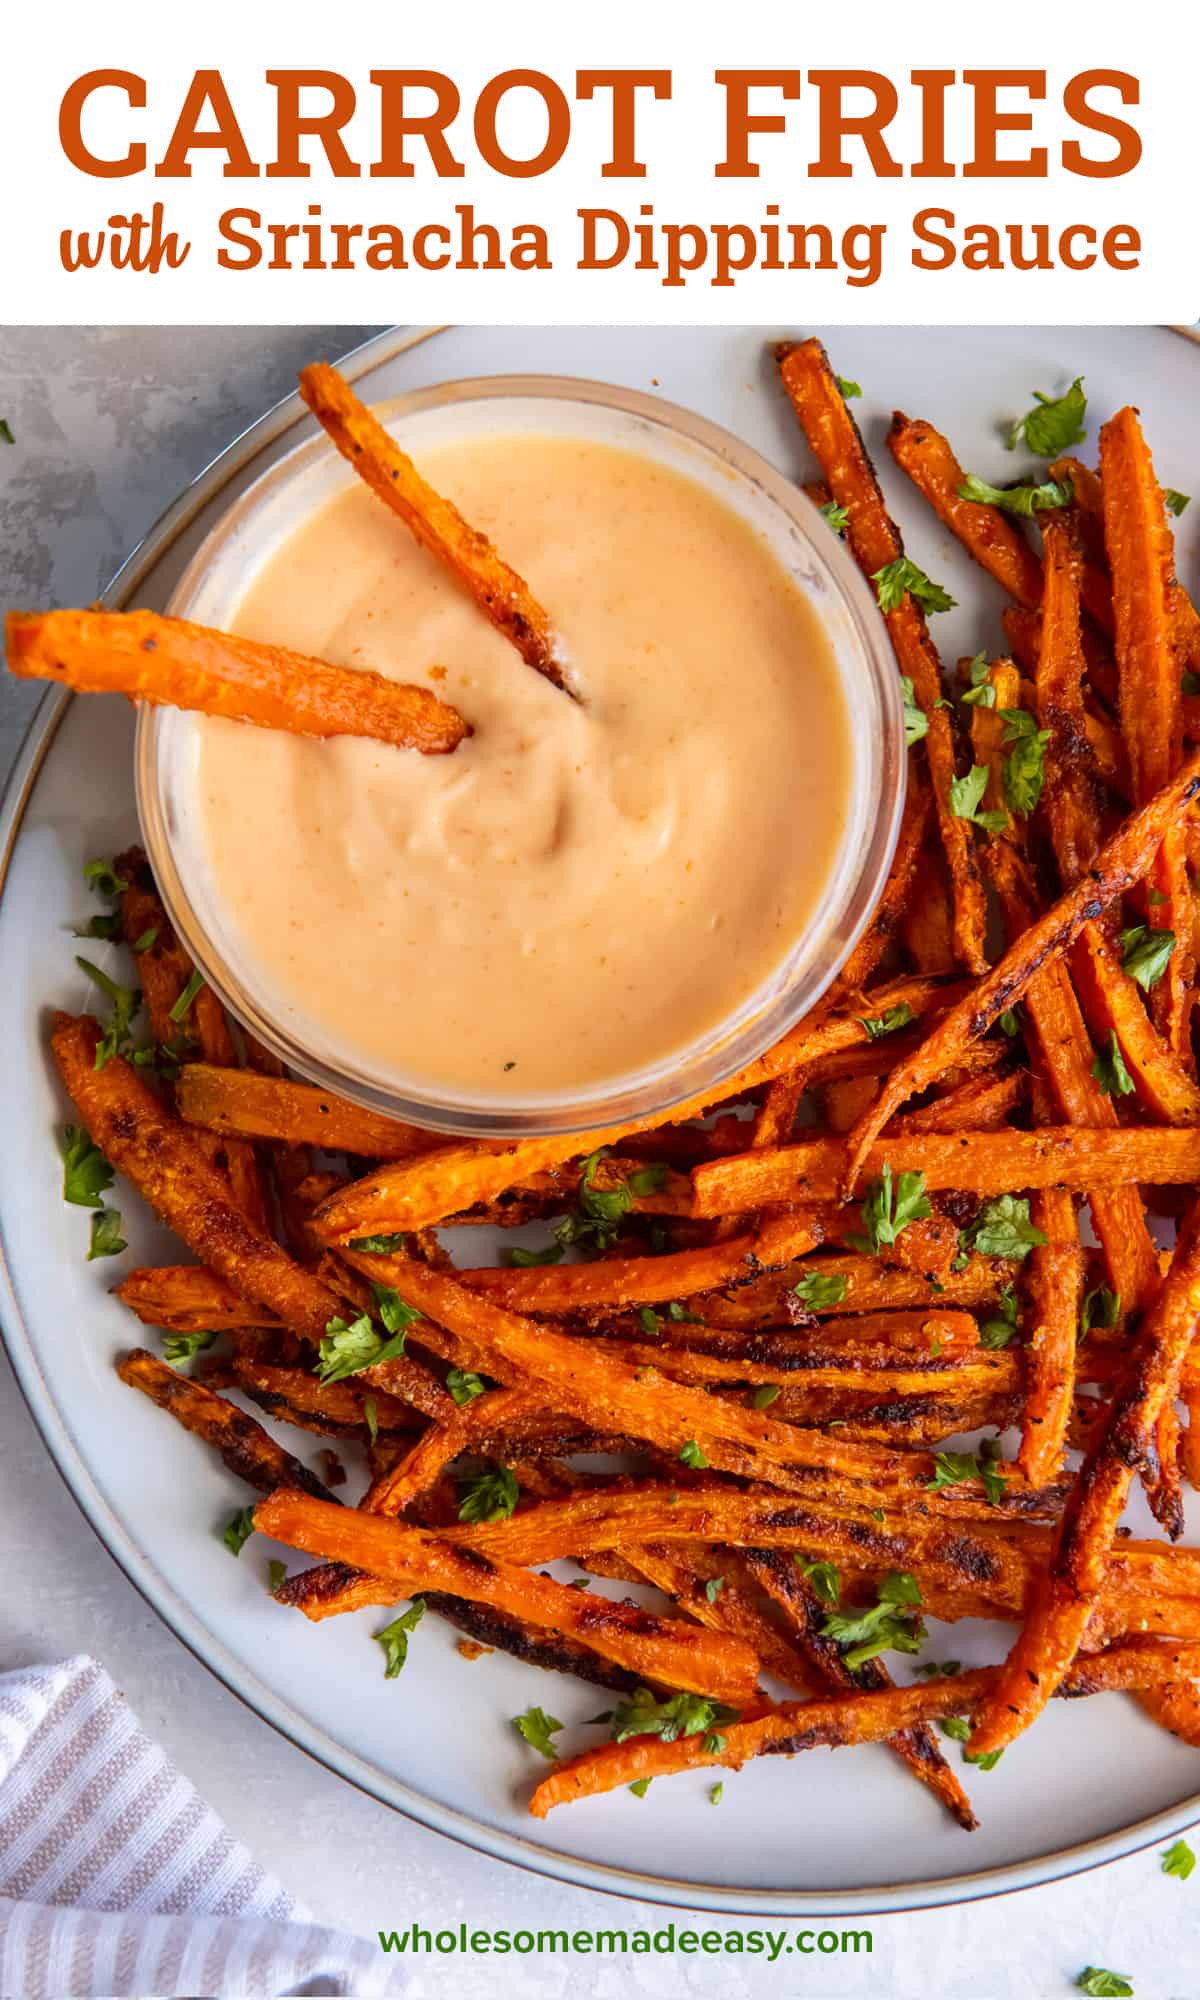 Two carrot fries resting in a bowl on sriacha dipping sauce on a white plate with text.